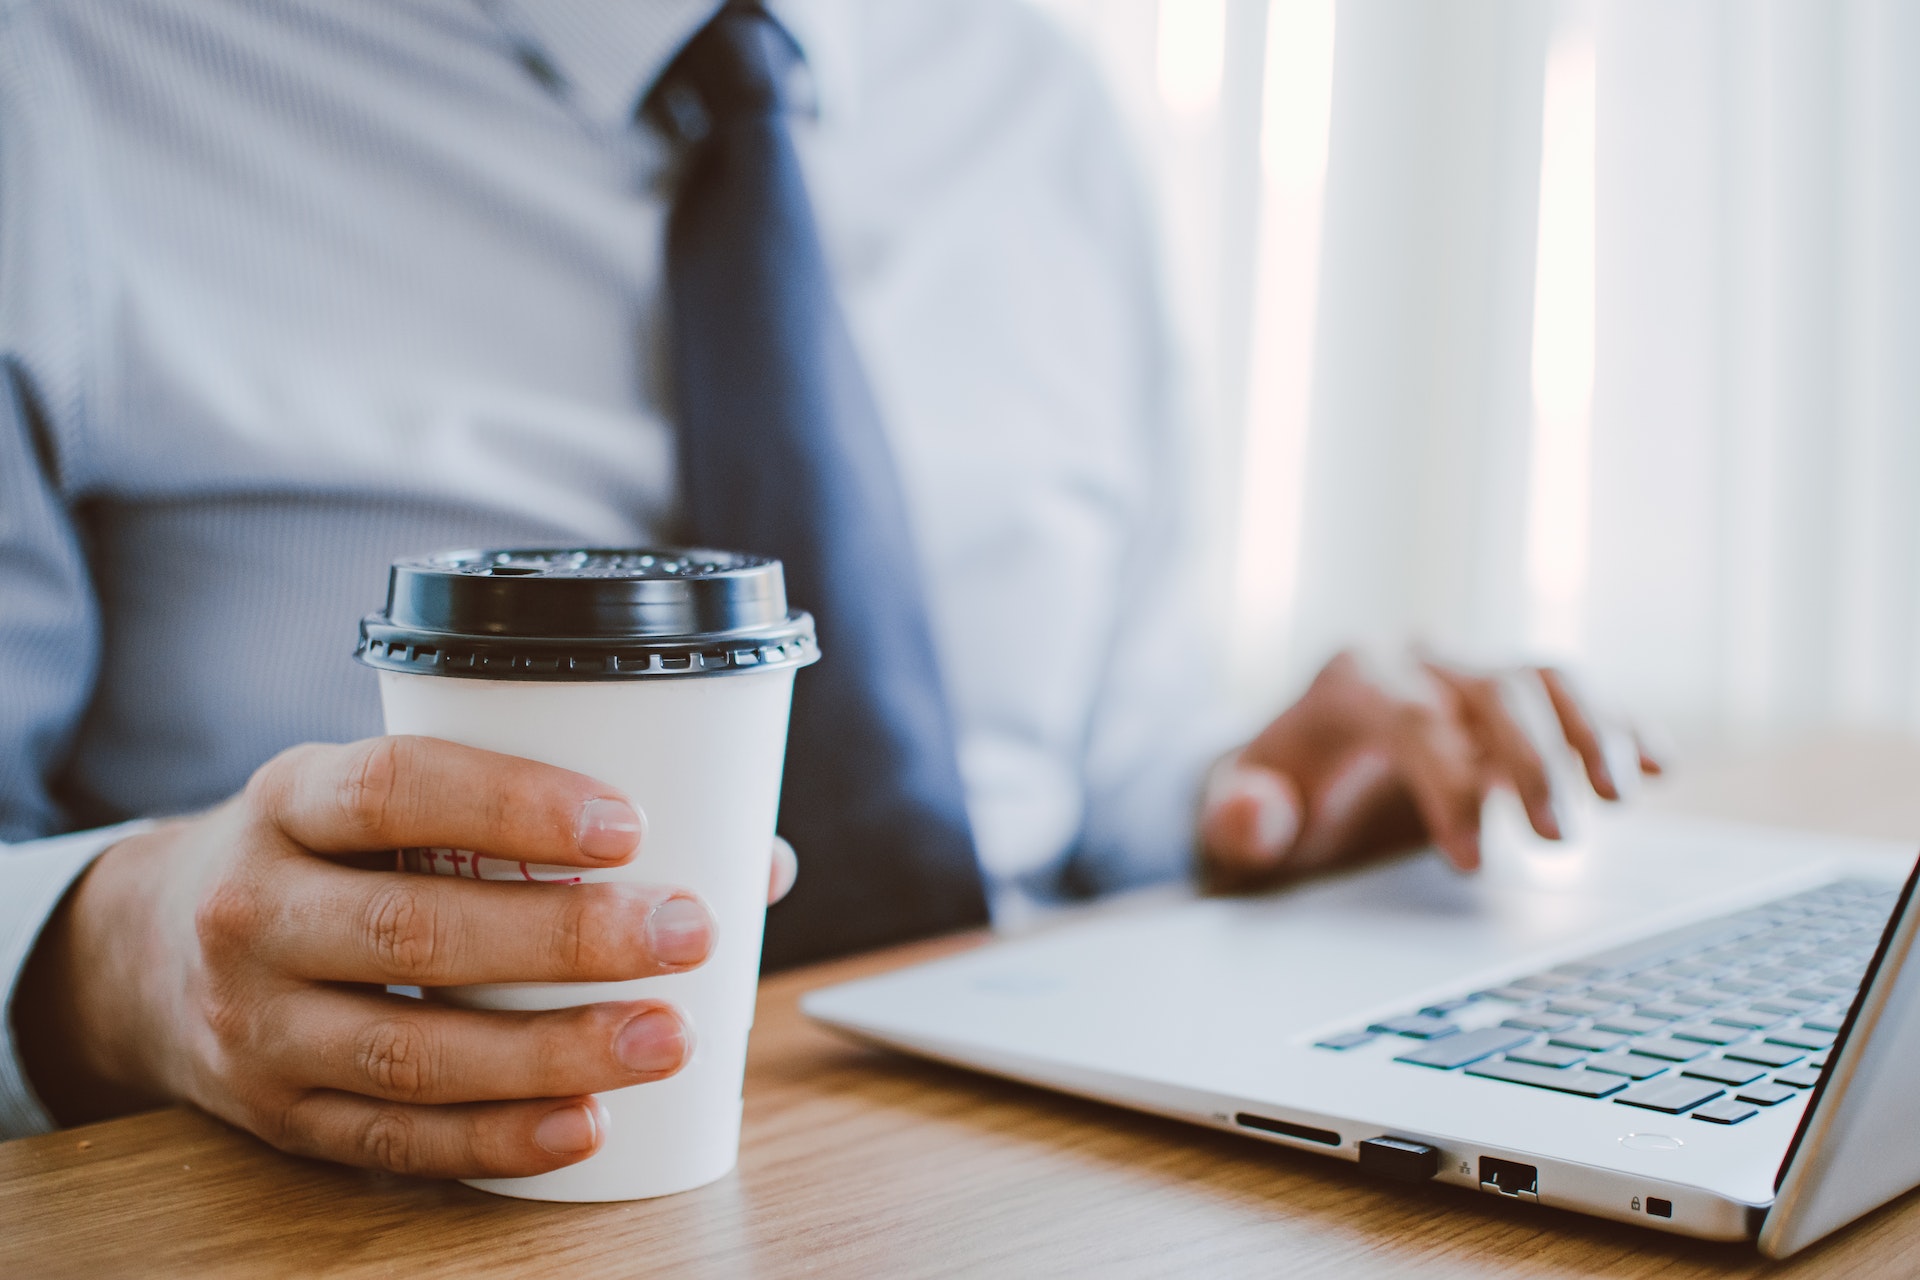 Man with coffee and laptop. Image by Lisa Fotios via Pexels.